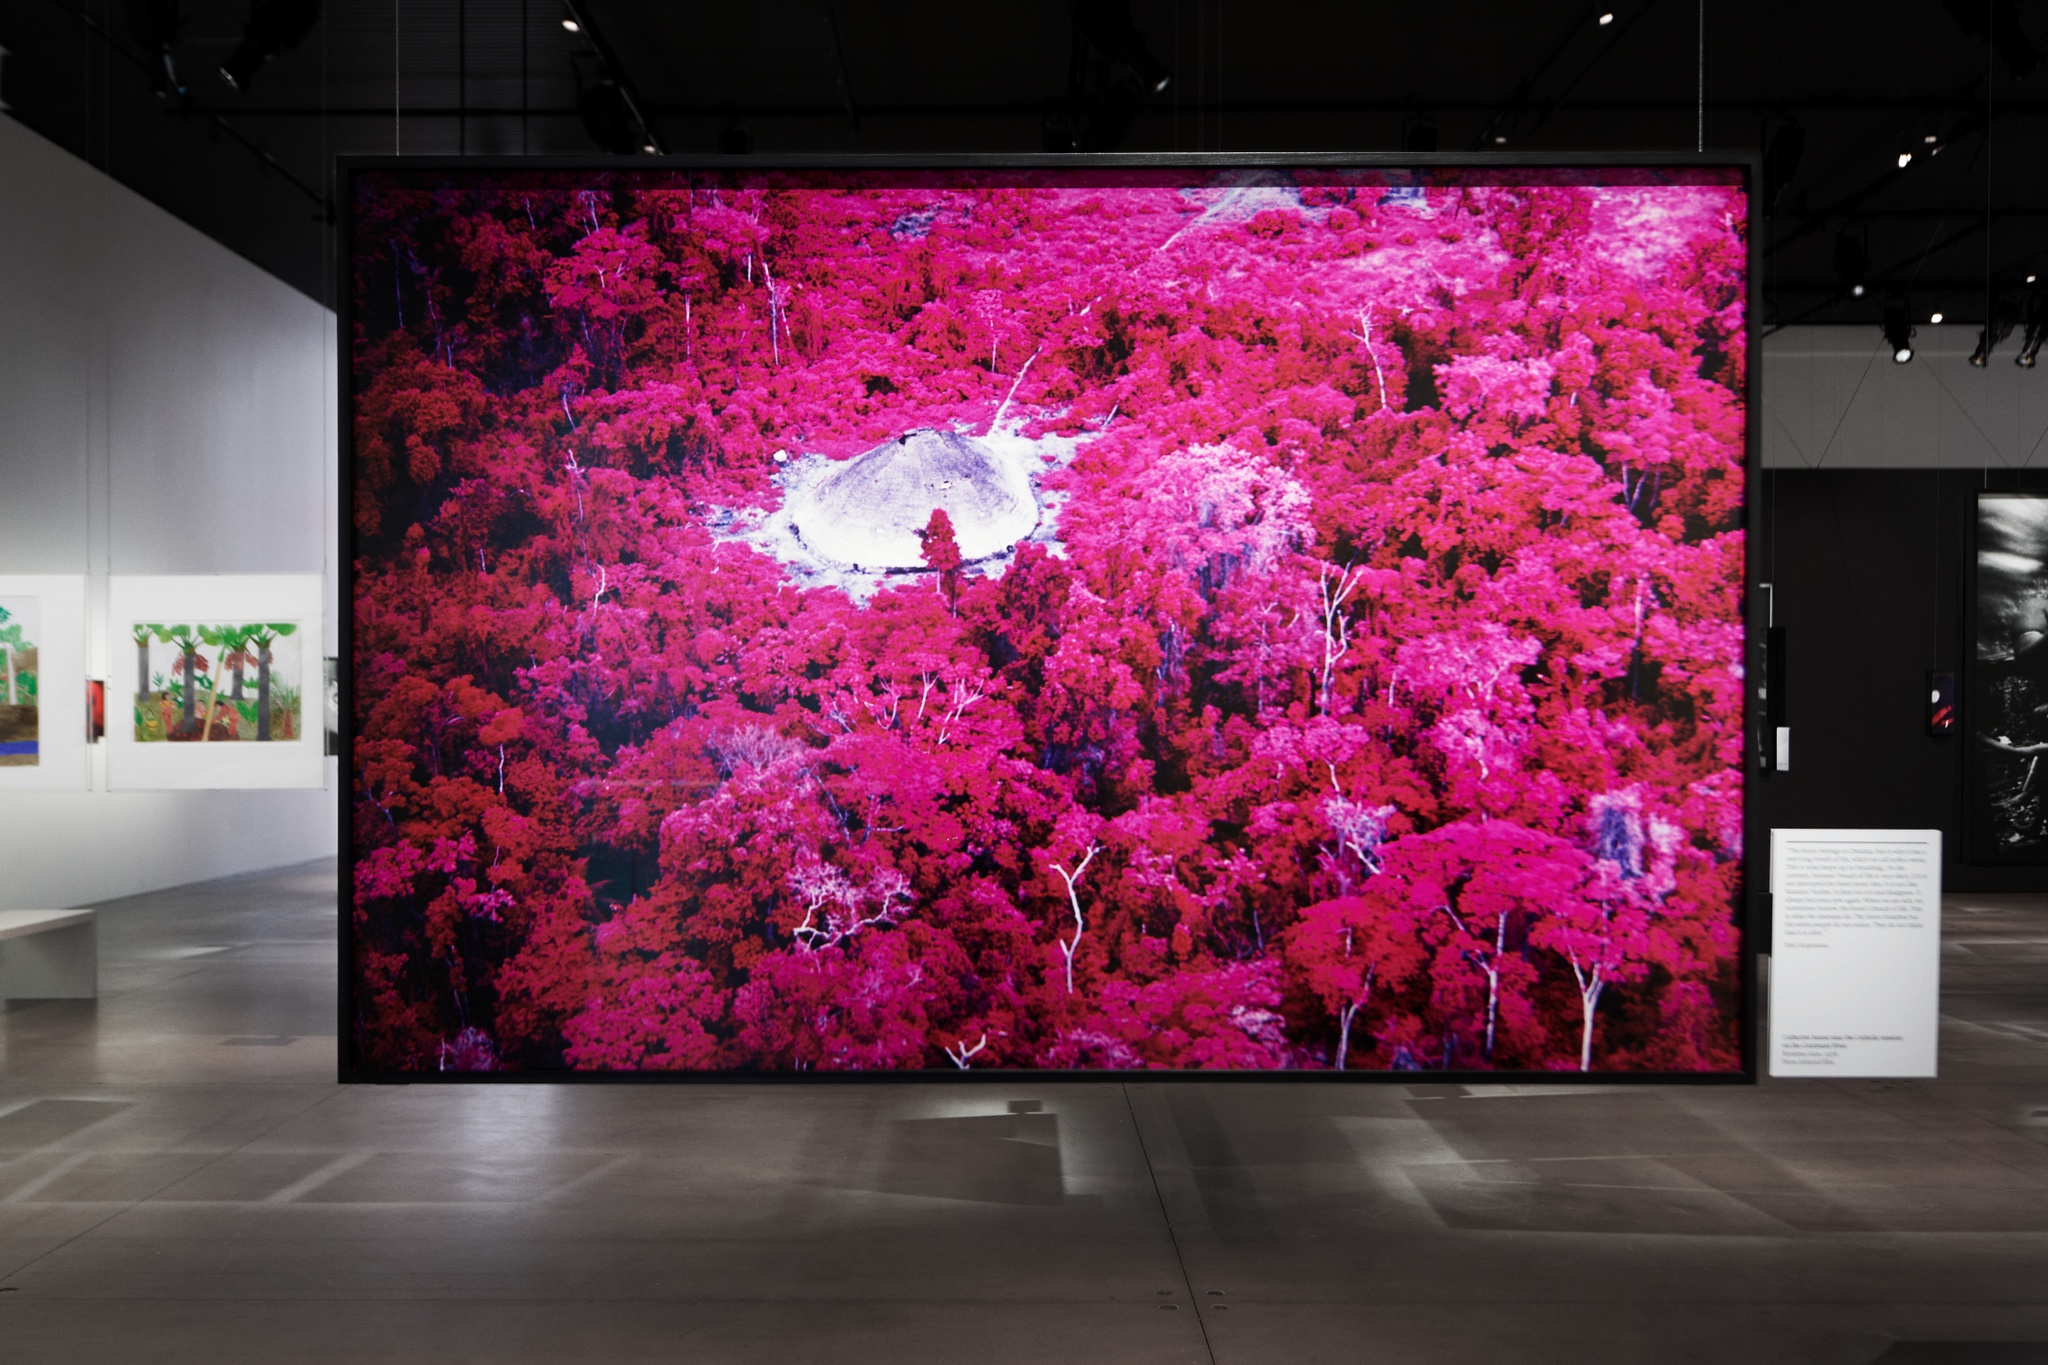 A photo suspended from the ceiling in an art gallery with other works in the background. The photo shows a forest from above with a clearing for a round communal house built by it Yanomami inhabitants, called a yano. The trees are an electric magenta color.